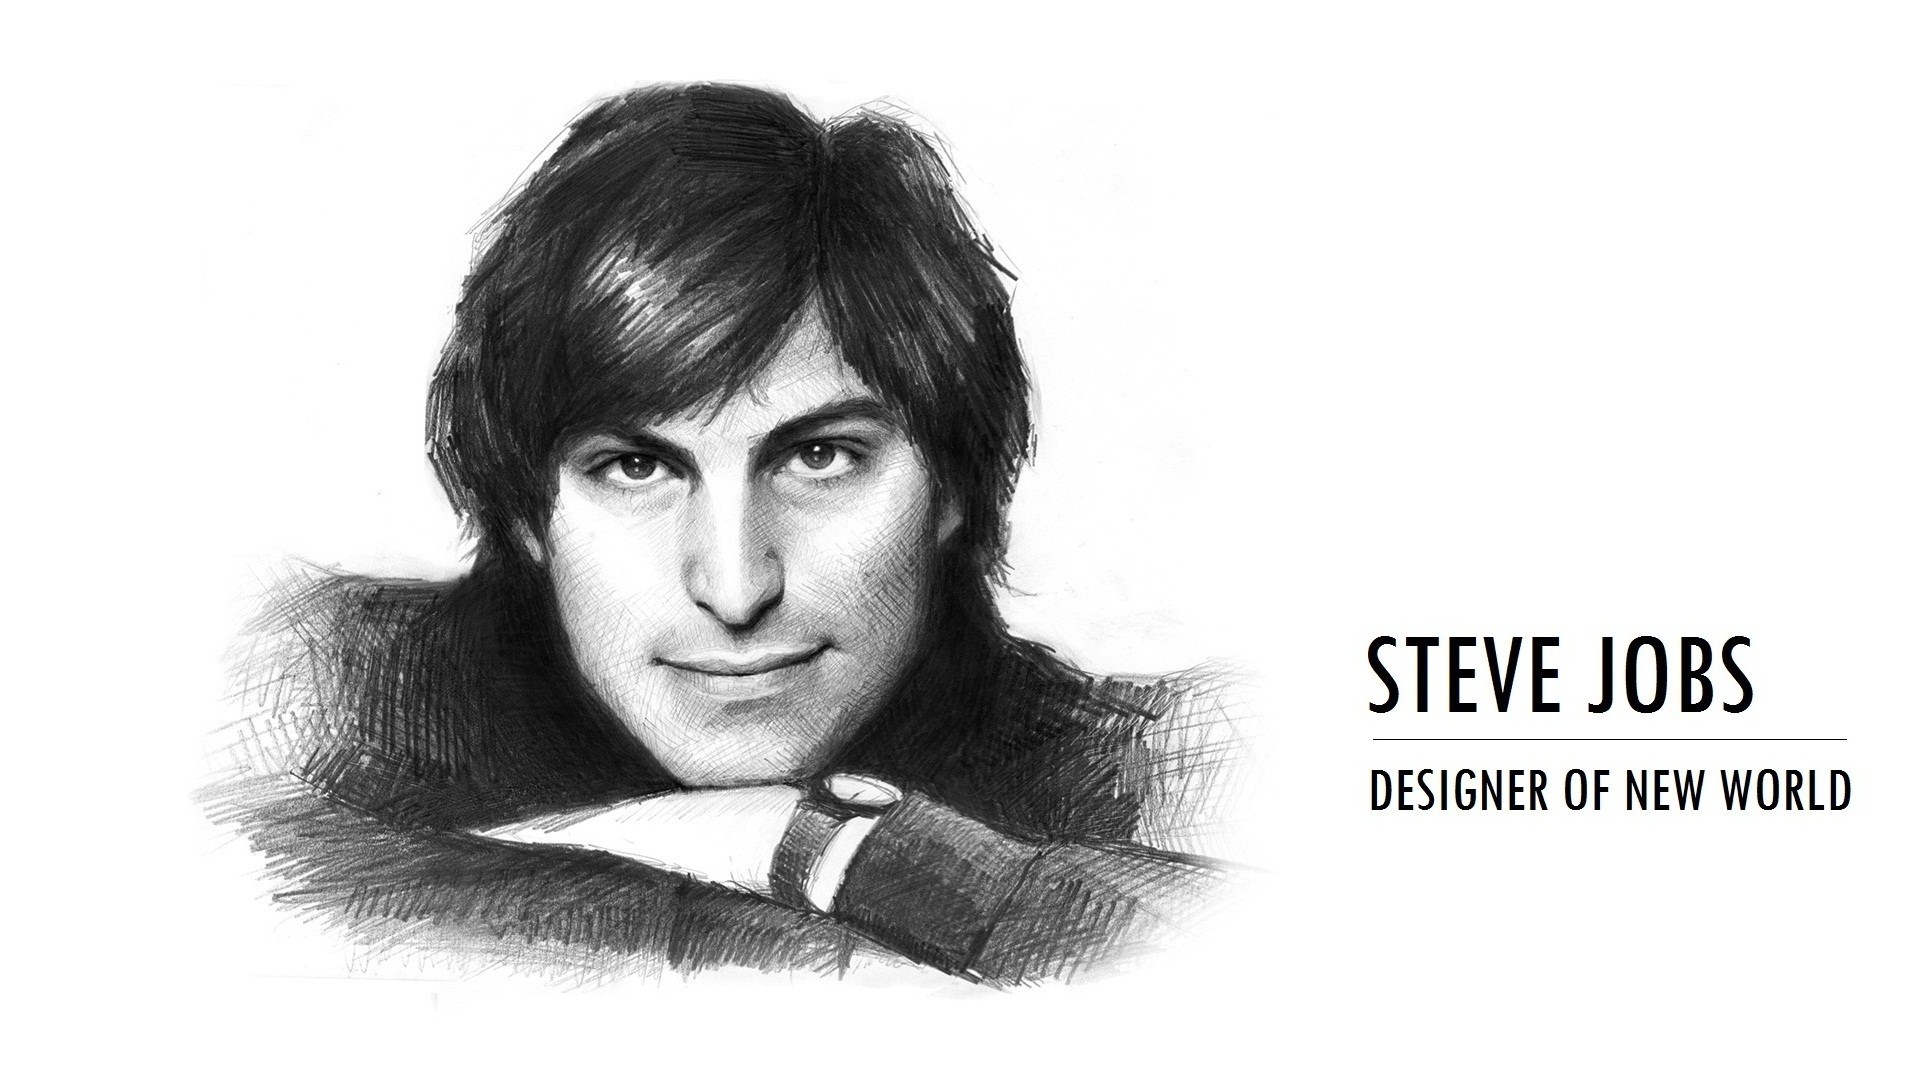 Steve Jobs Quotes Stay Hungry Stay Foolish wallpaper - 1116499